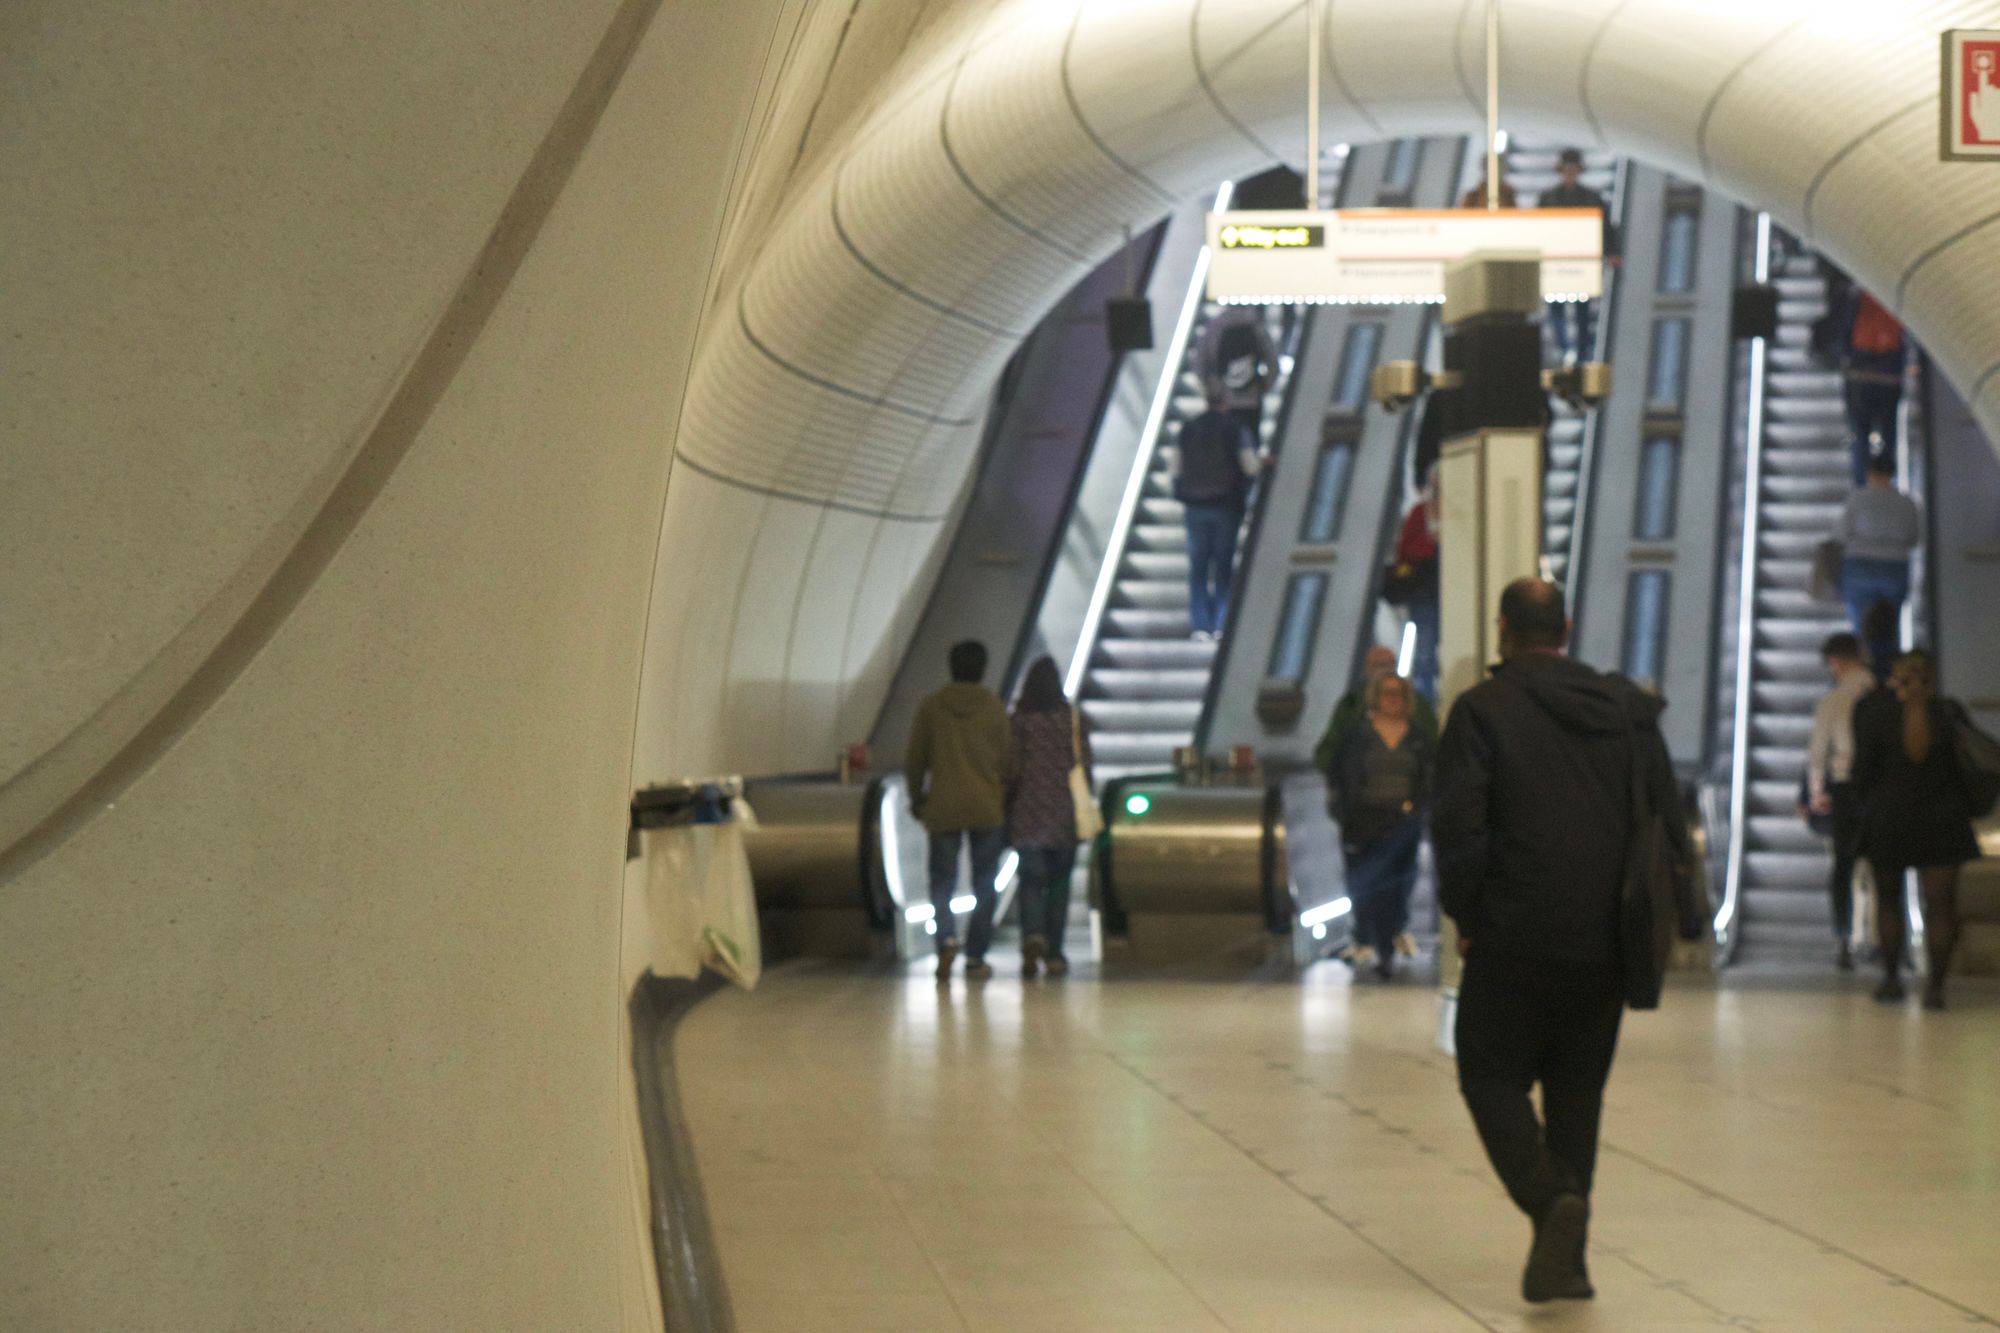 An escalator seems to rise through a curved tunnel from a landing. The walls bend and have no right angles.